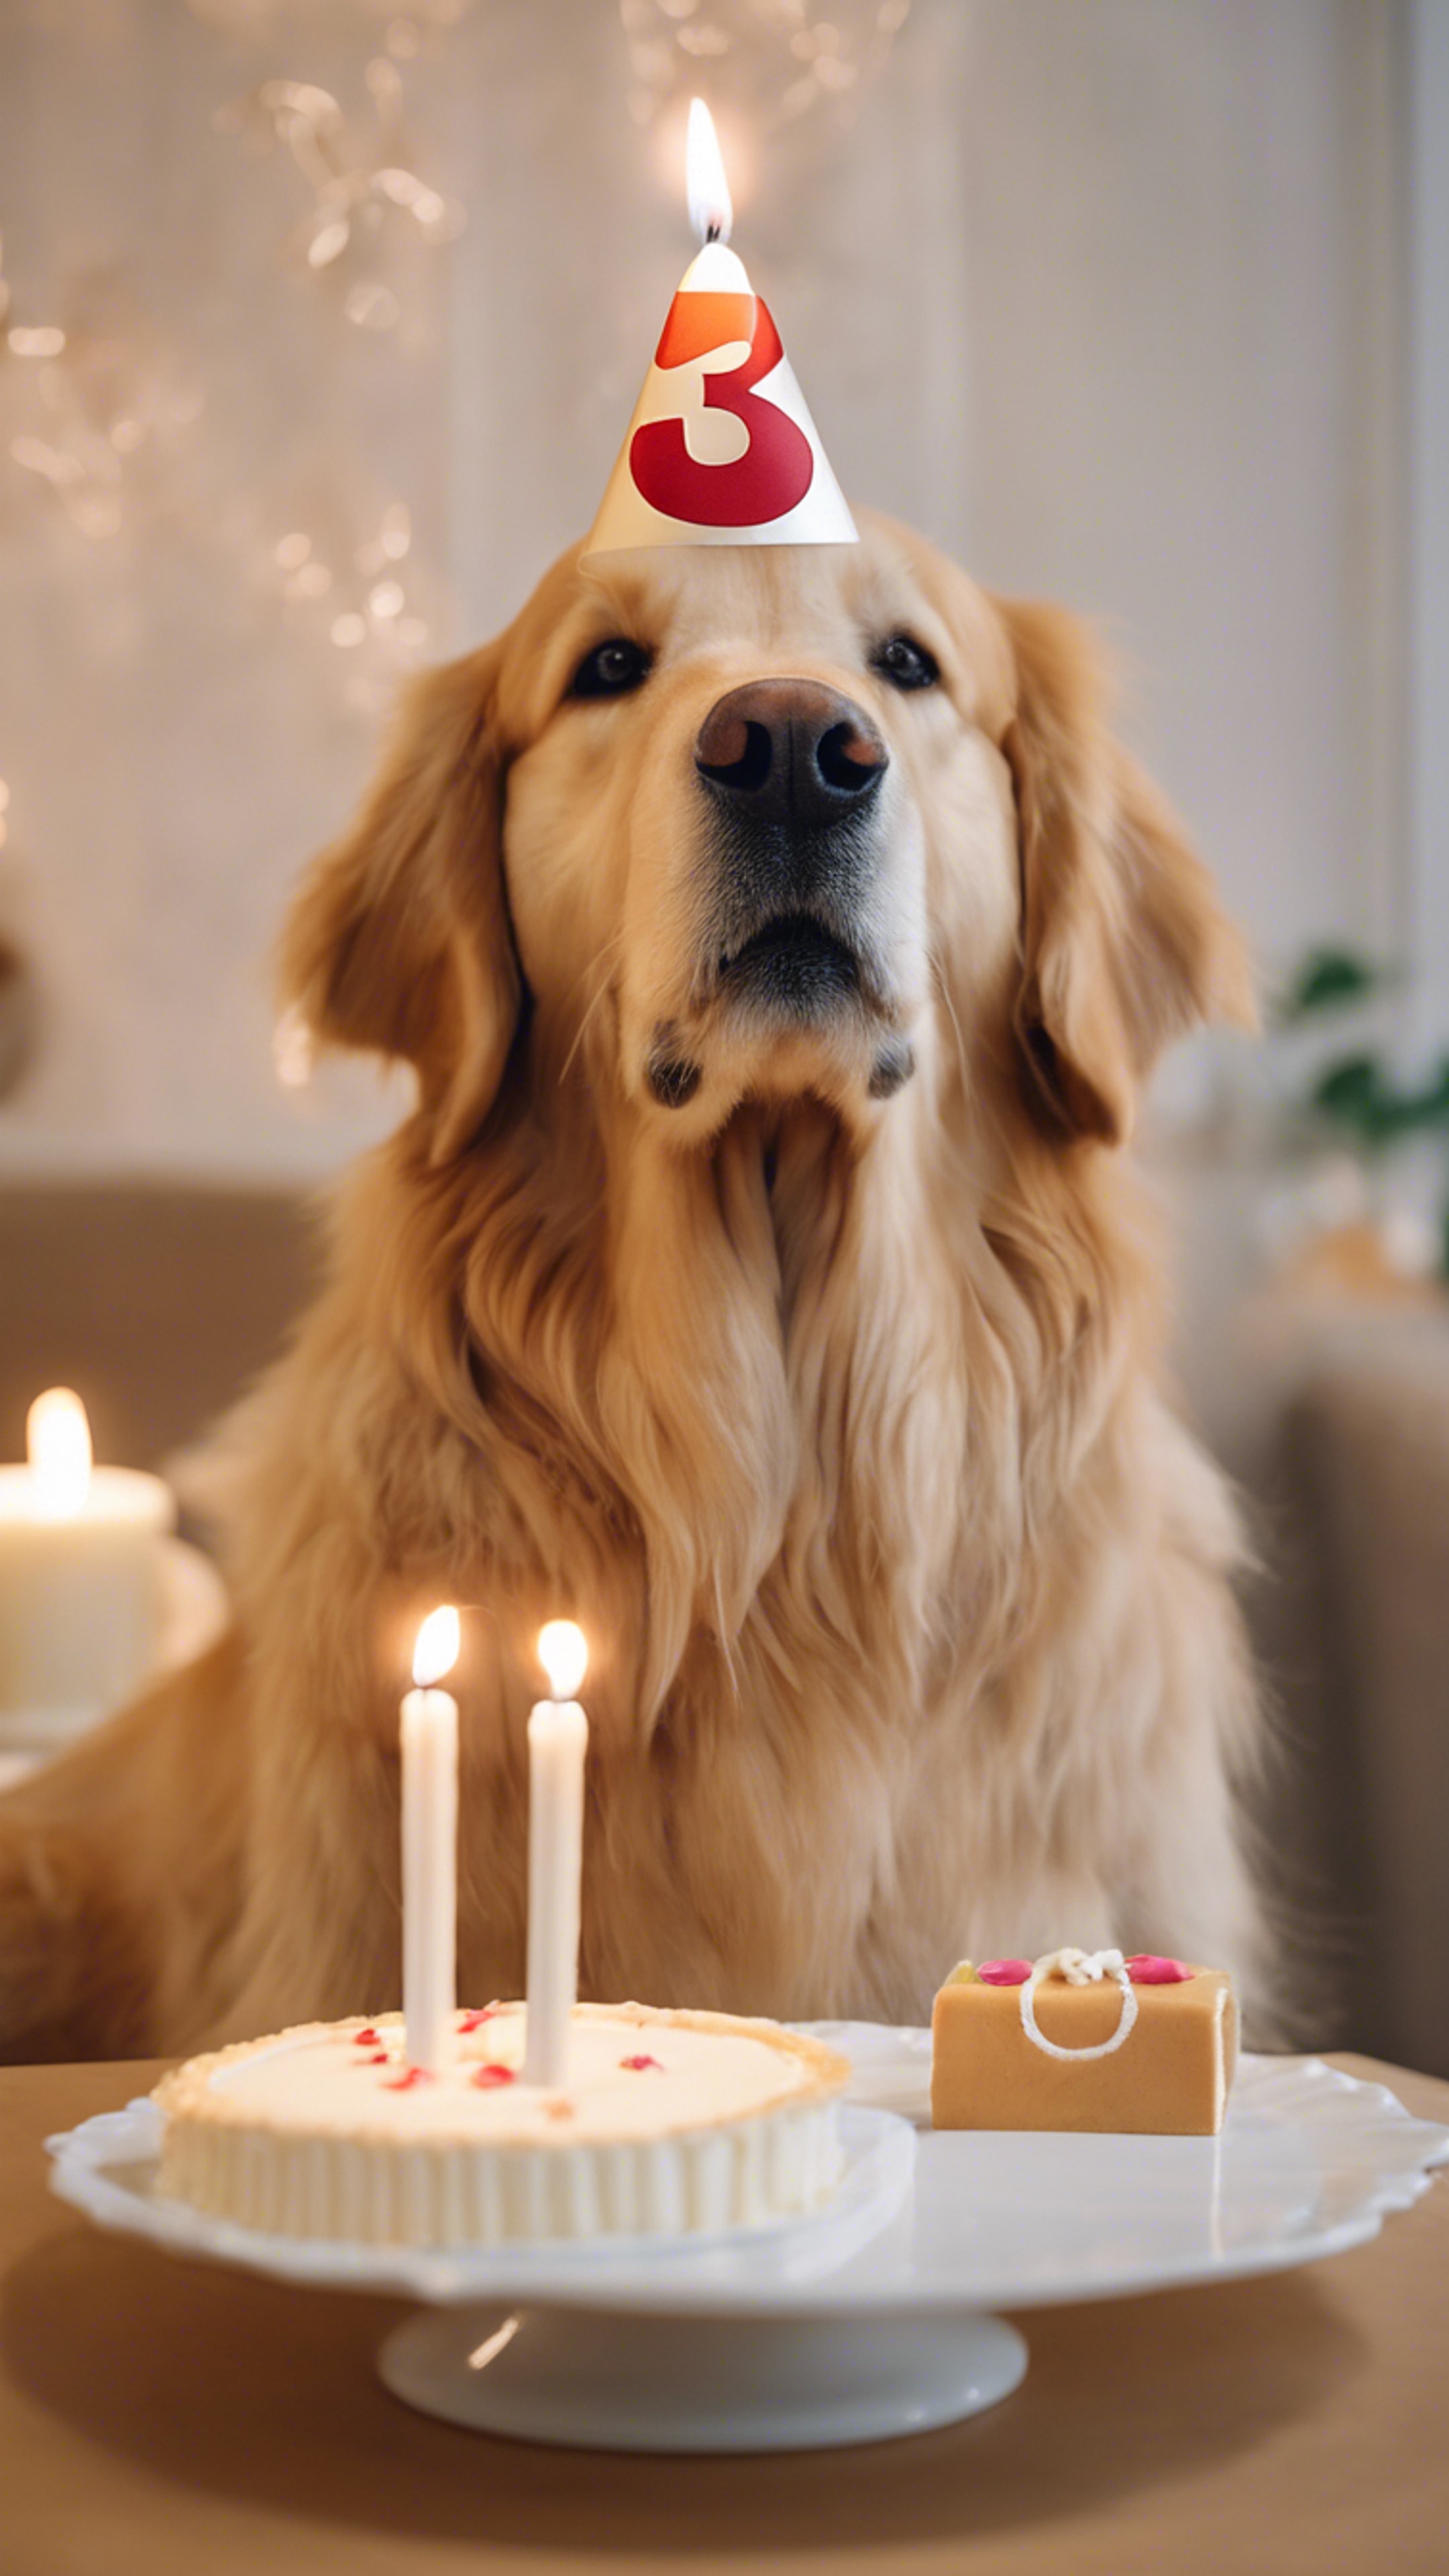 A golden retriever wearing a birthday hat, sitting in front of a numbered '3' candle on a small cake, looking eagerly at the camera. Тапет[271fe240b95e4af1b864]